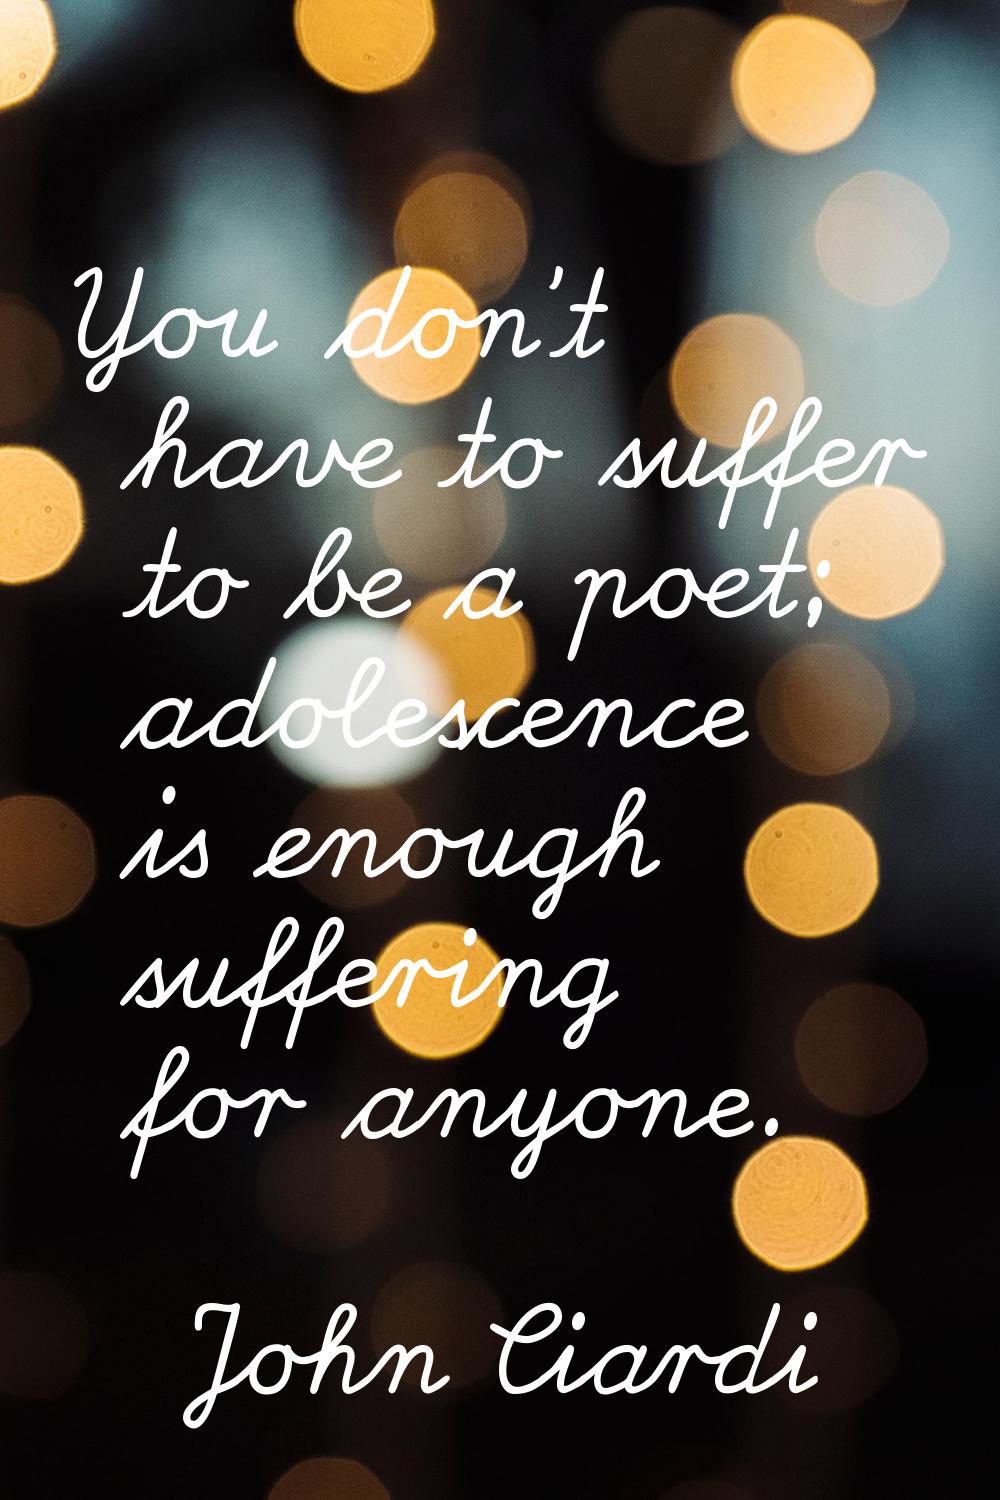 You don't have to suffer to be a poet; adolescence is enough suffering for anyone.